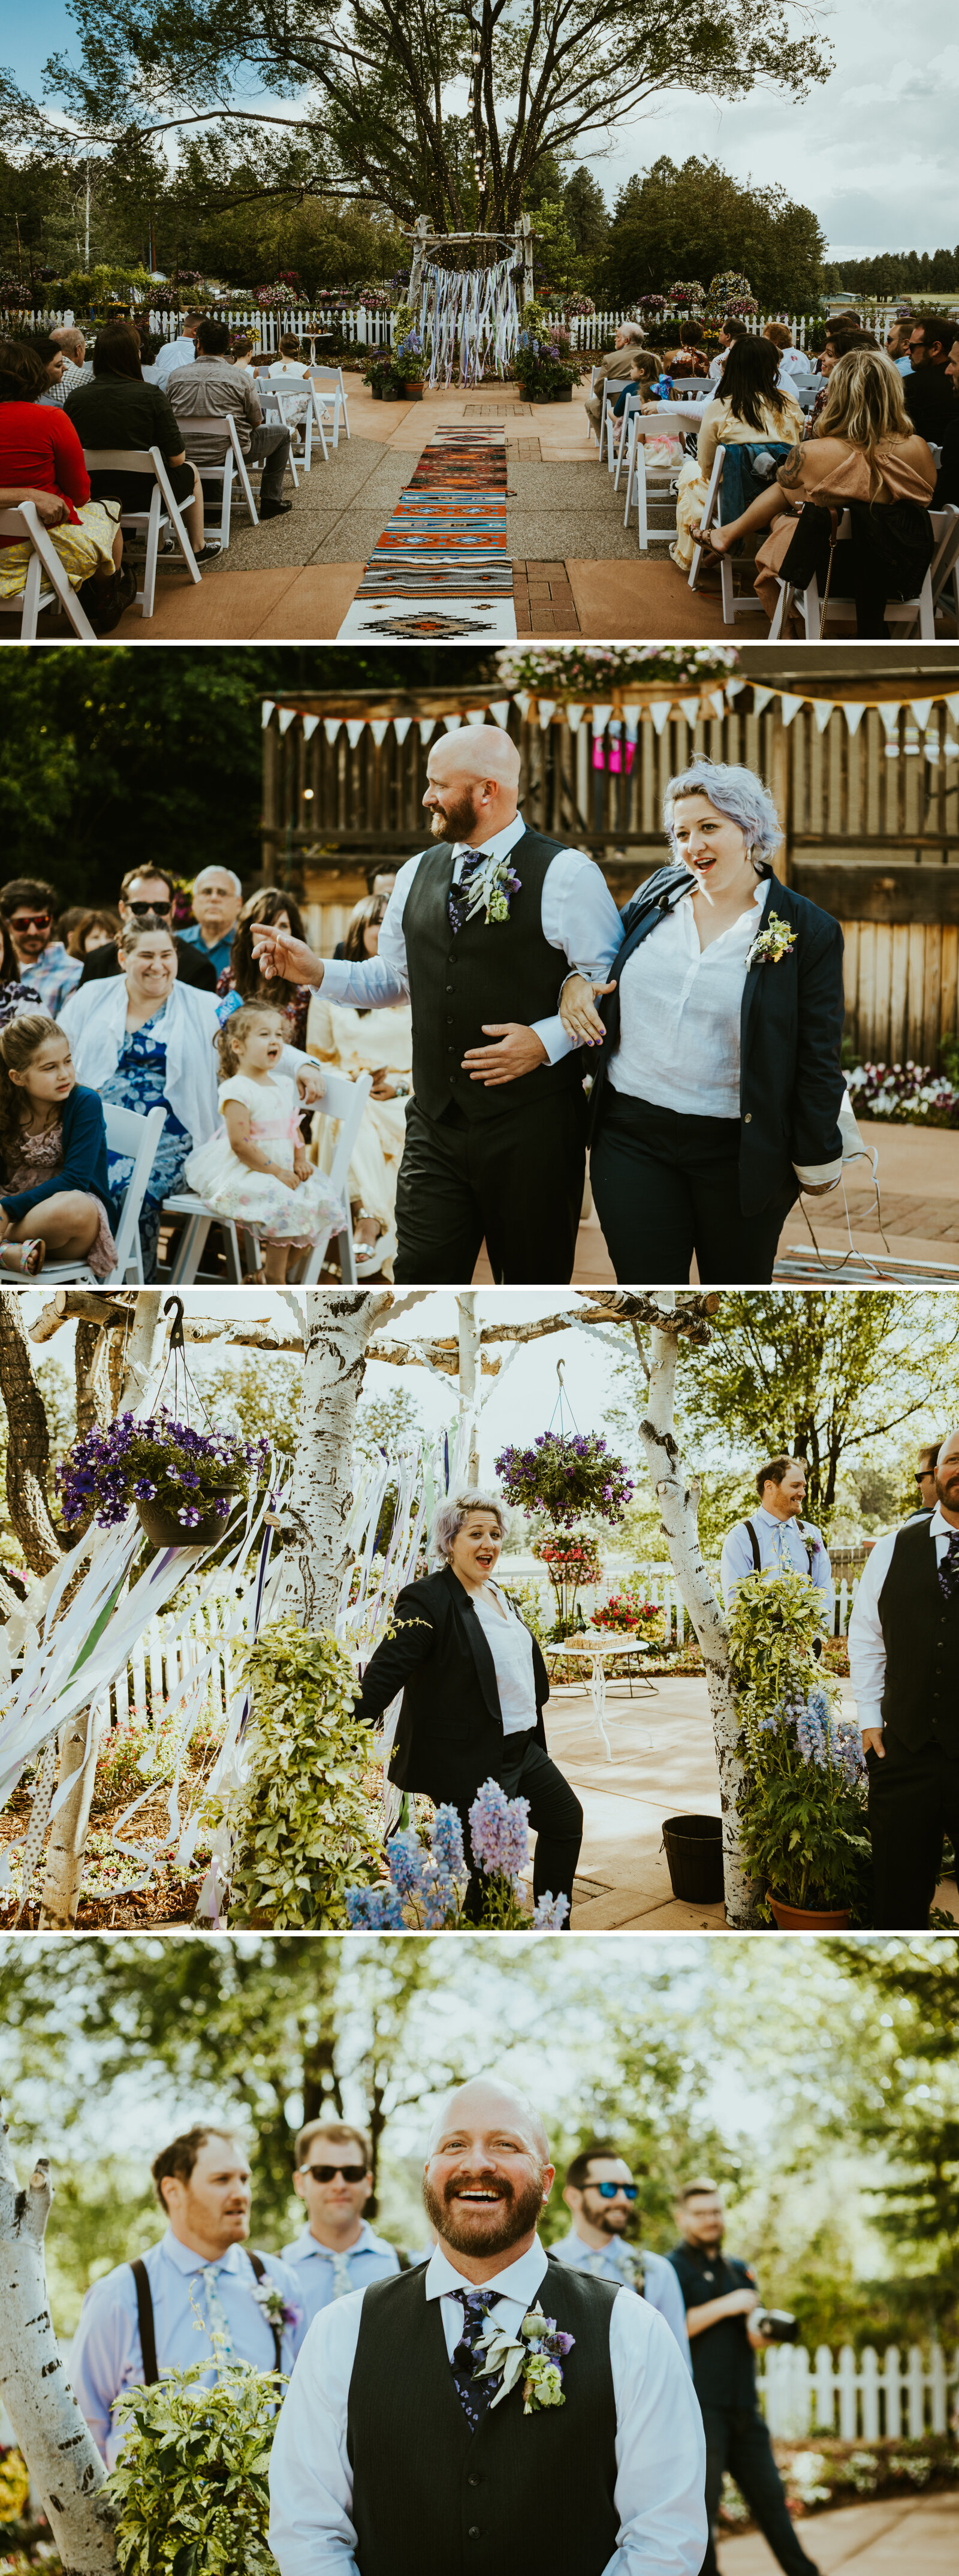 A groom walking down the aisle with his sister who officiates the wedding in flagstaff arizona.jpg